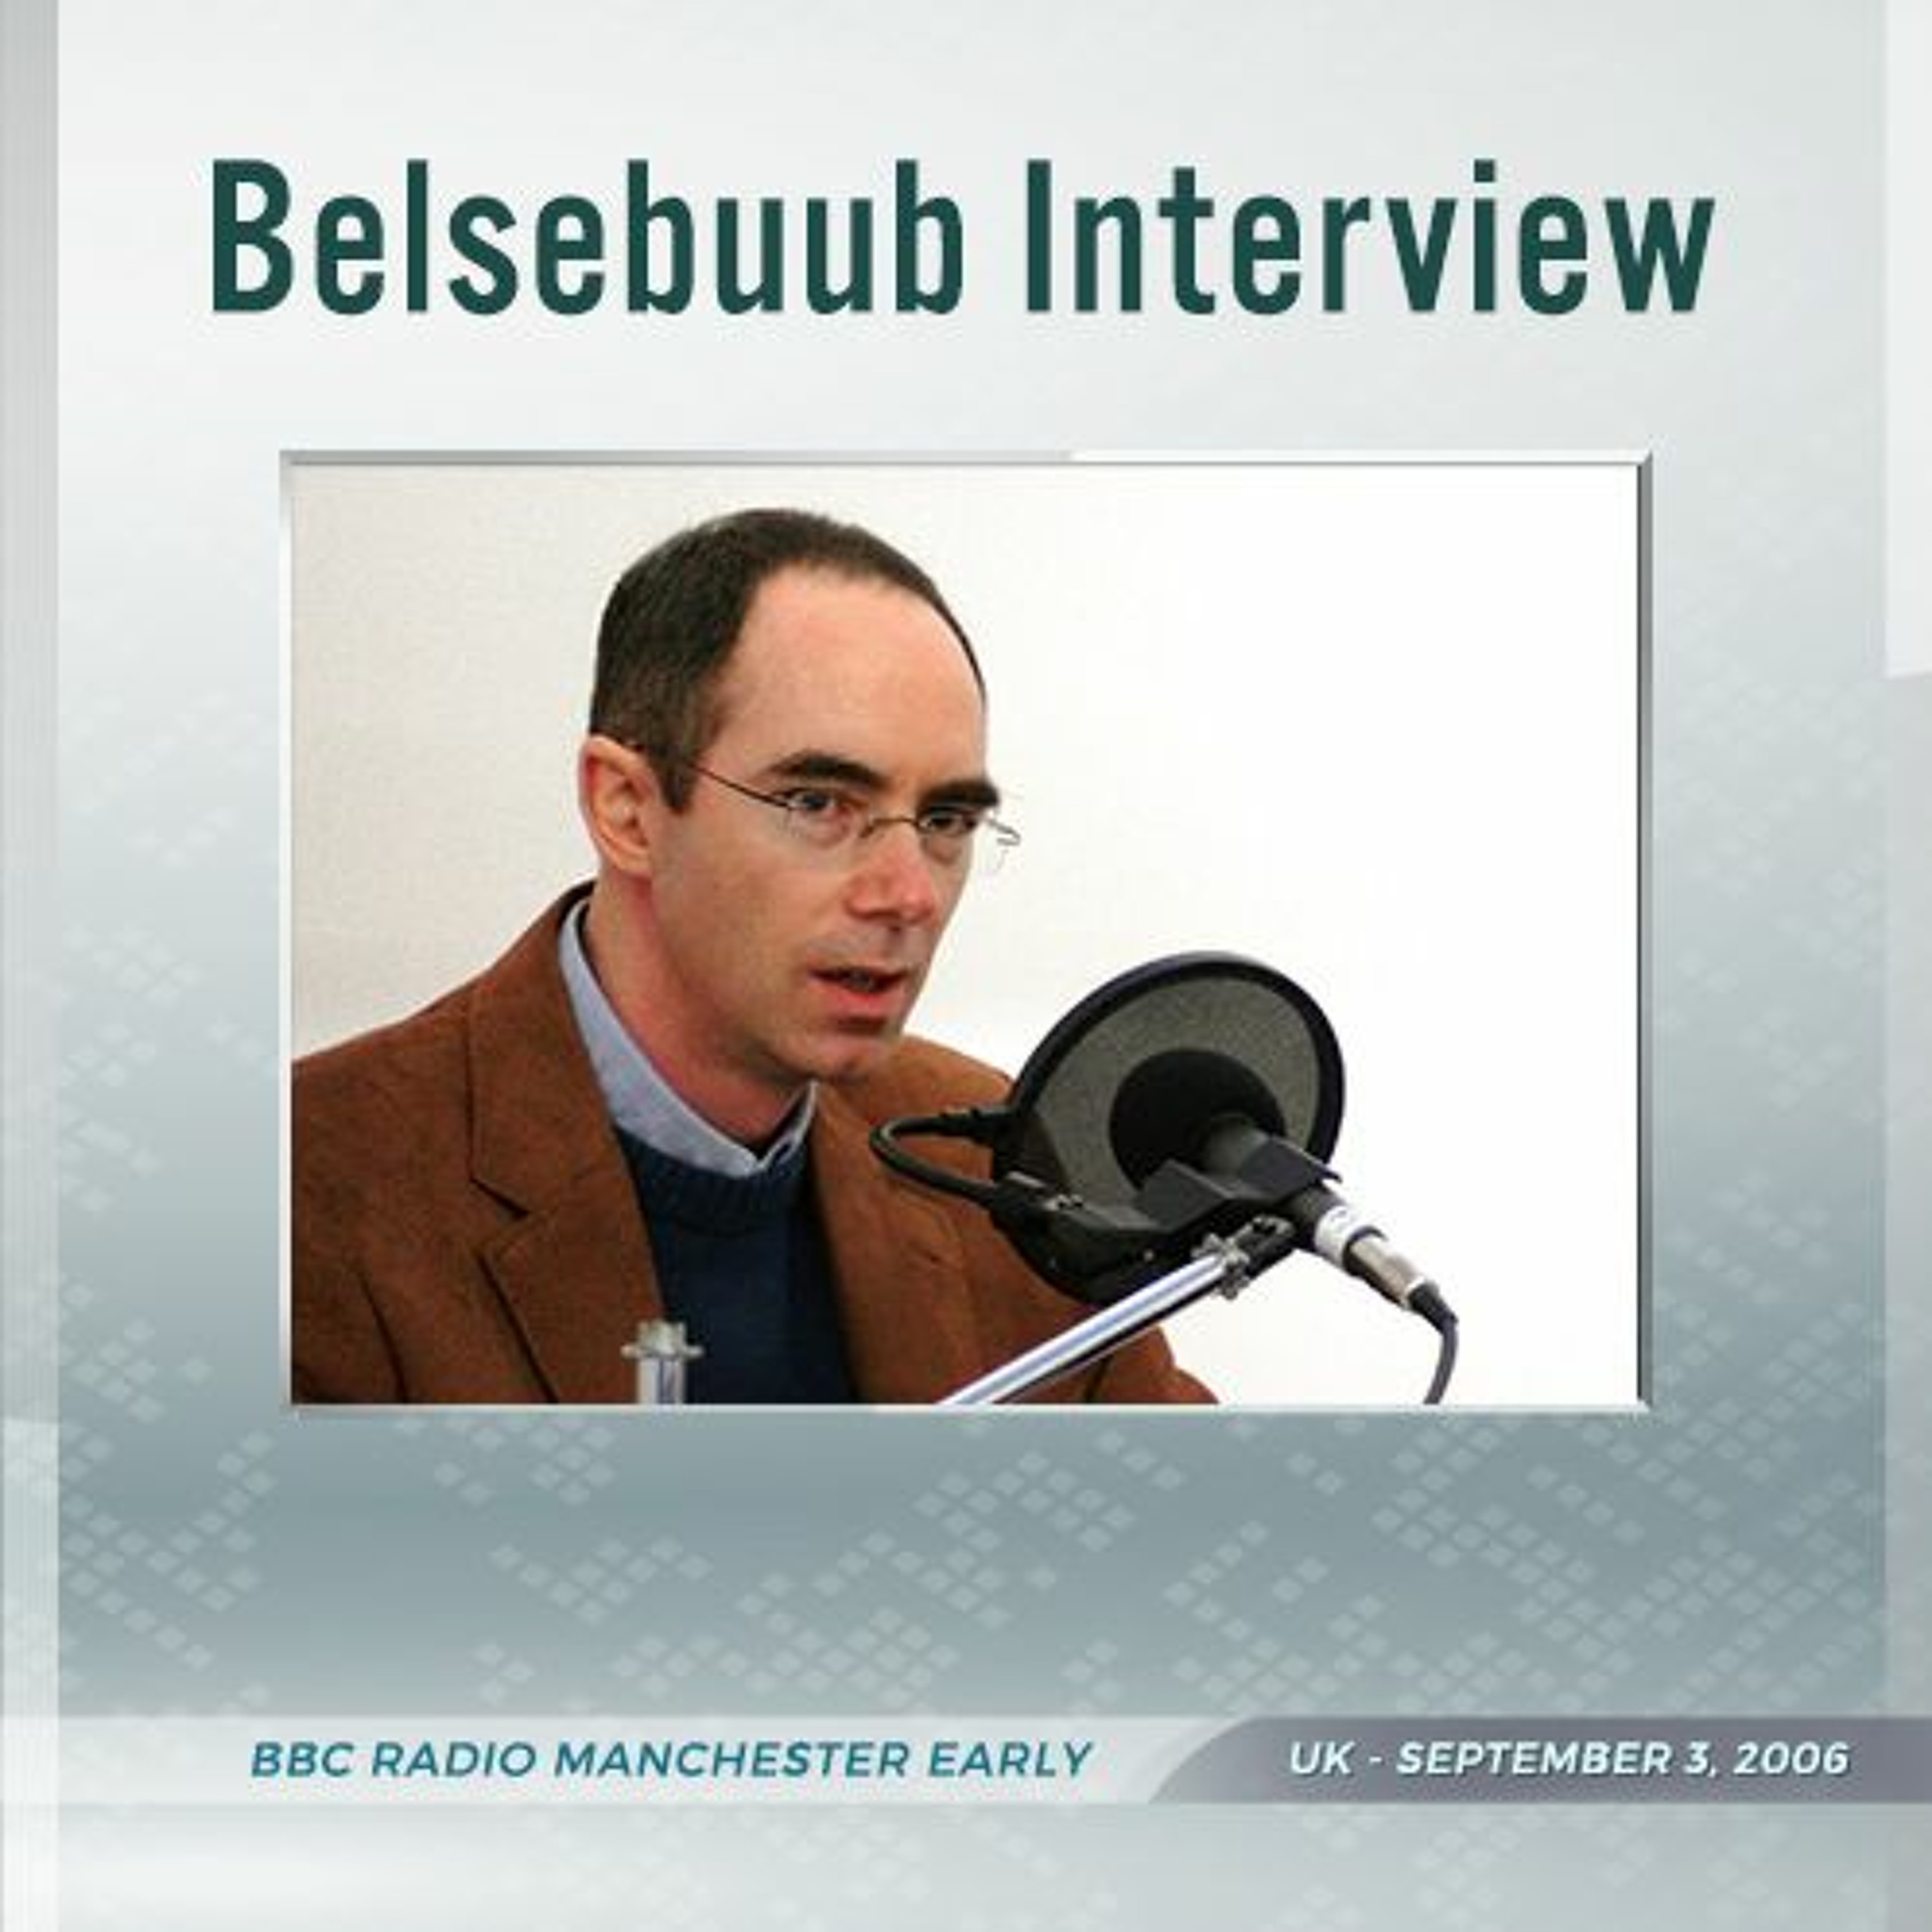 Belsebuub on BBC Radio Manchester: How Important are Dreams?